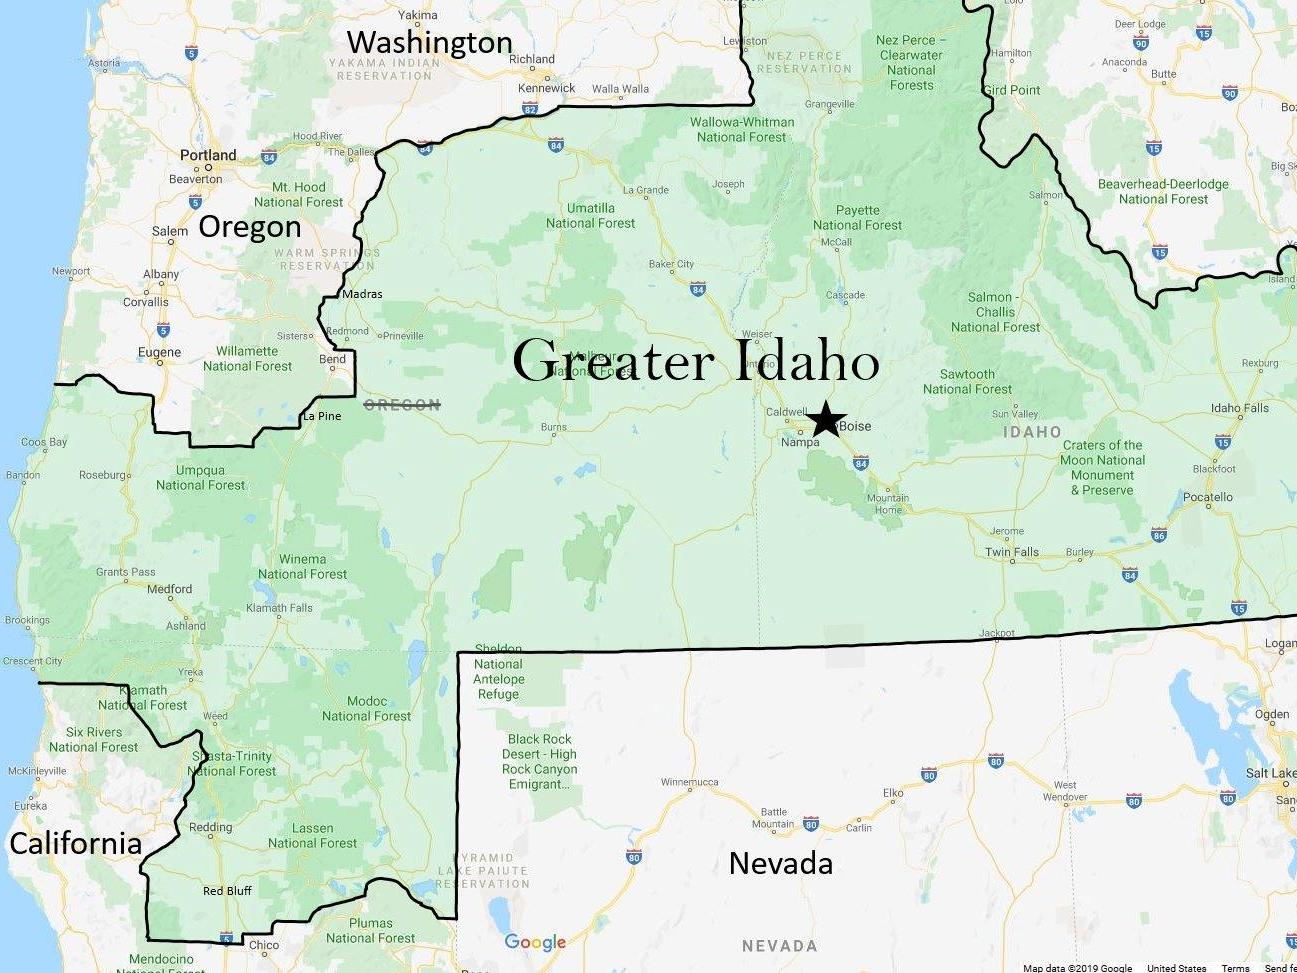 Oregon conservatives want to redraw state lines so their counties can join Idaho